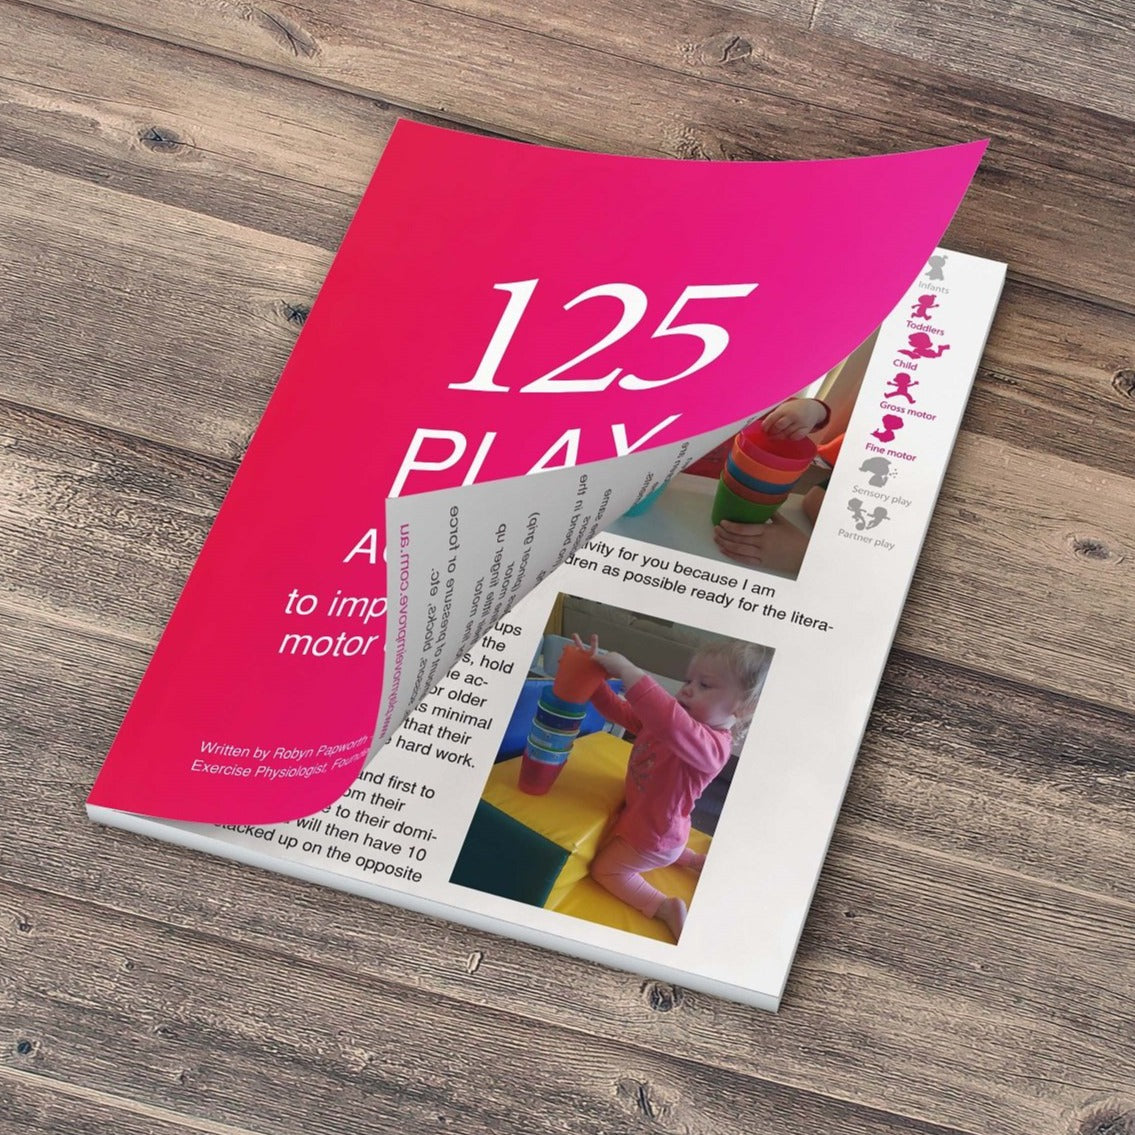 Play Activities to Promote Child Motor Development. Ideal for Infants, Toddlers, and Children. Motor Development Index, Quick Flick Index, Motor Development Checklist. Perfect for Educators Seeking Play Ideas.